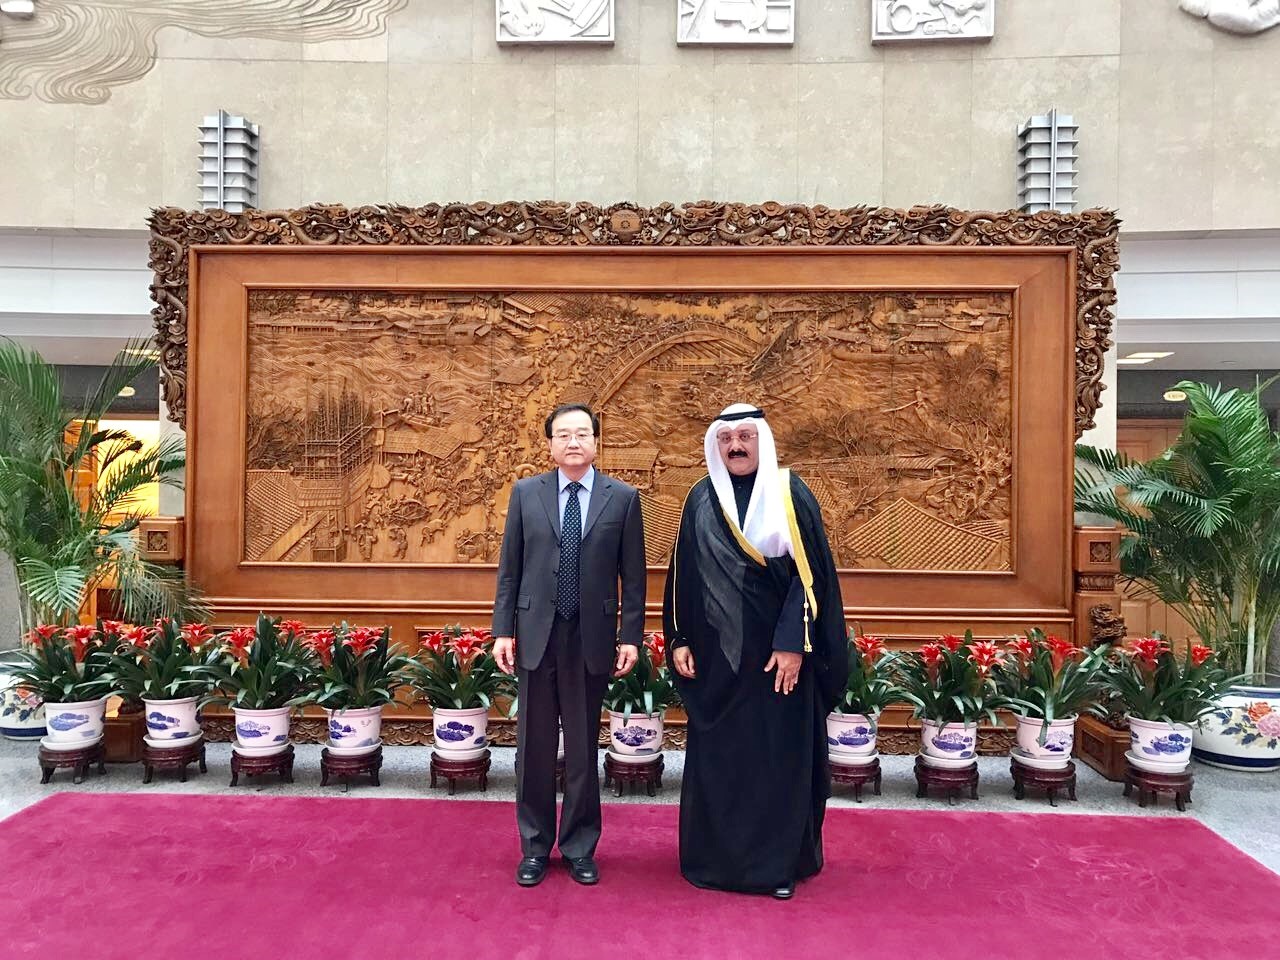 Kuwait's Ambassador to China Samih Johar Hayat with Director General of the Department of West Asian and North African affairs of the Chinese Foreign Ministry Deng Li